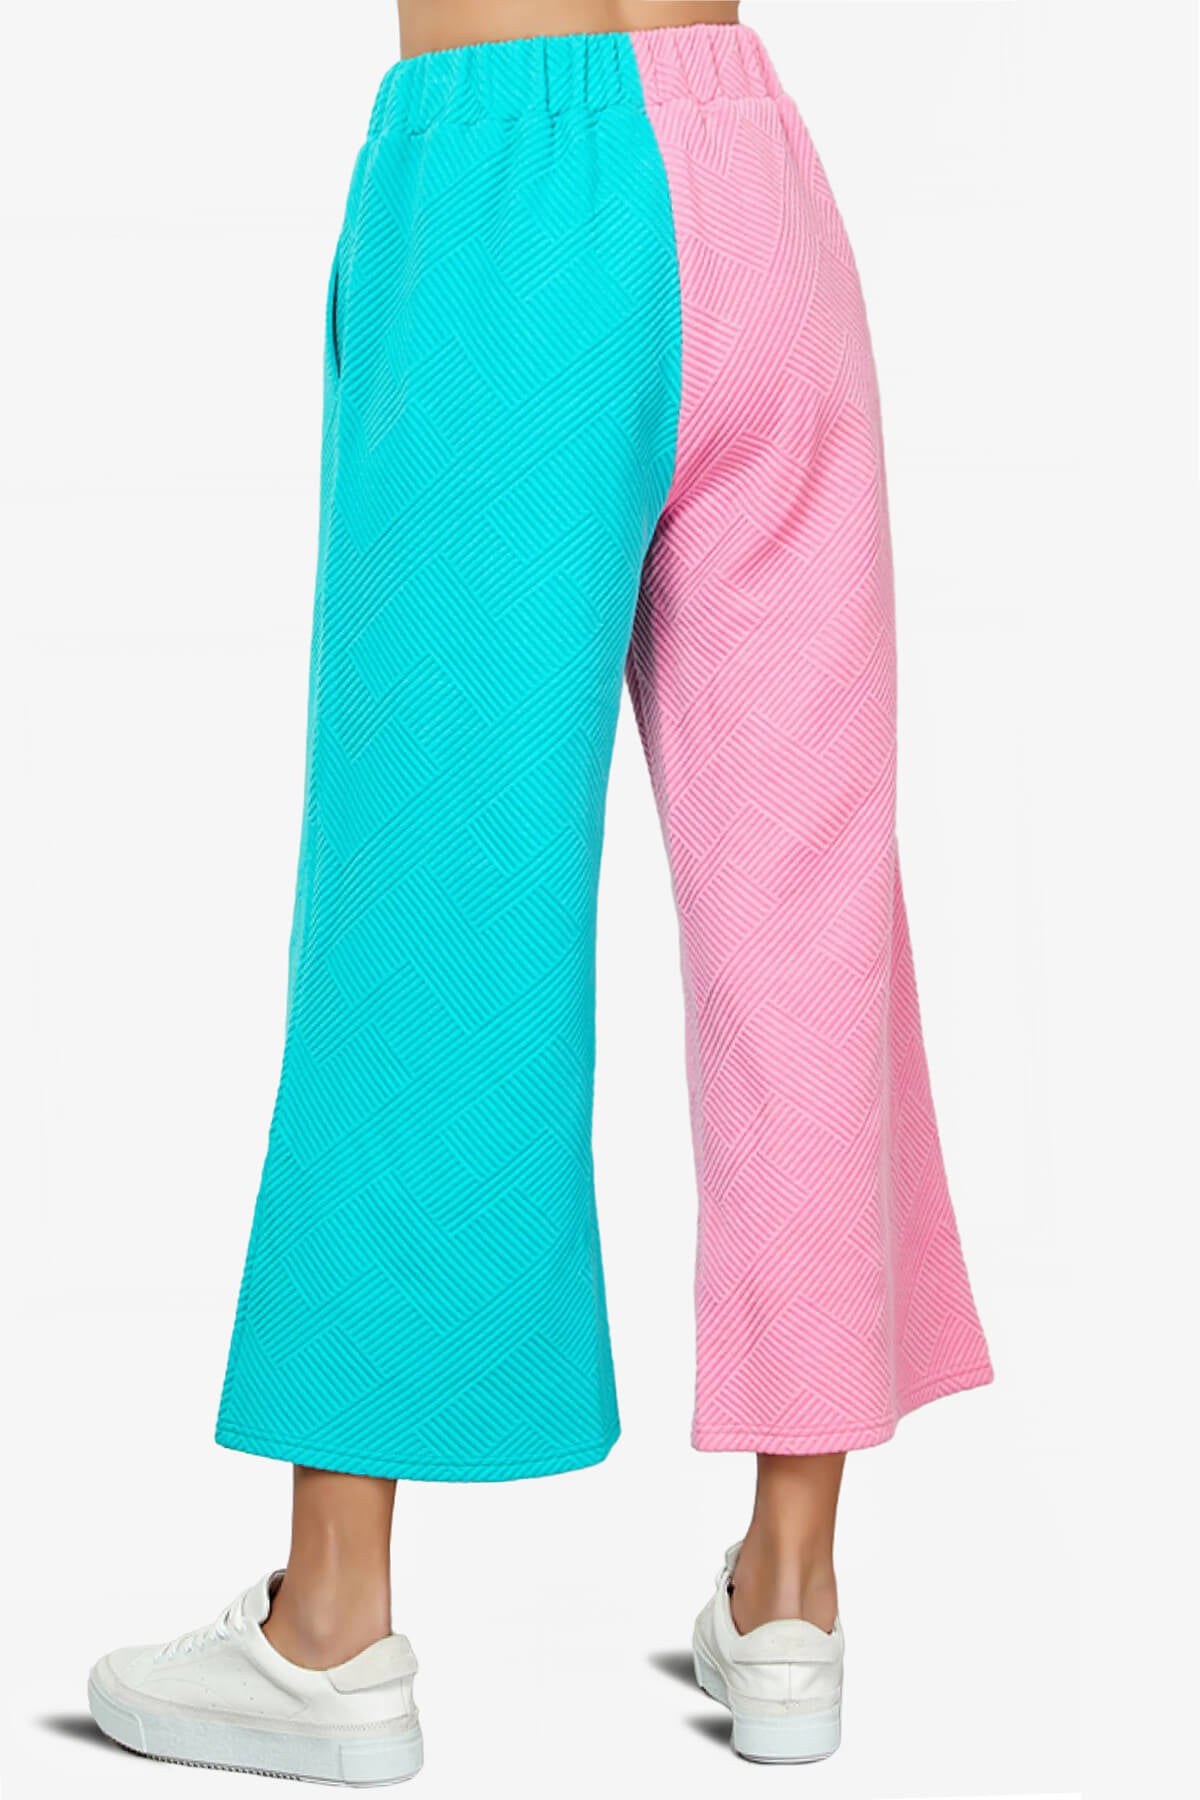 Lassy Textured Colorblock Lounge Culotte PINK AND BLUE_2